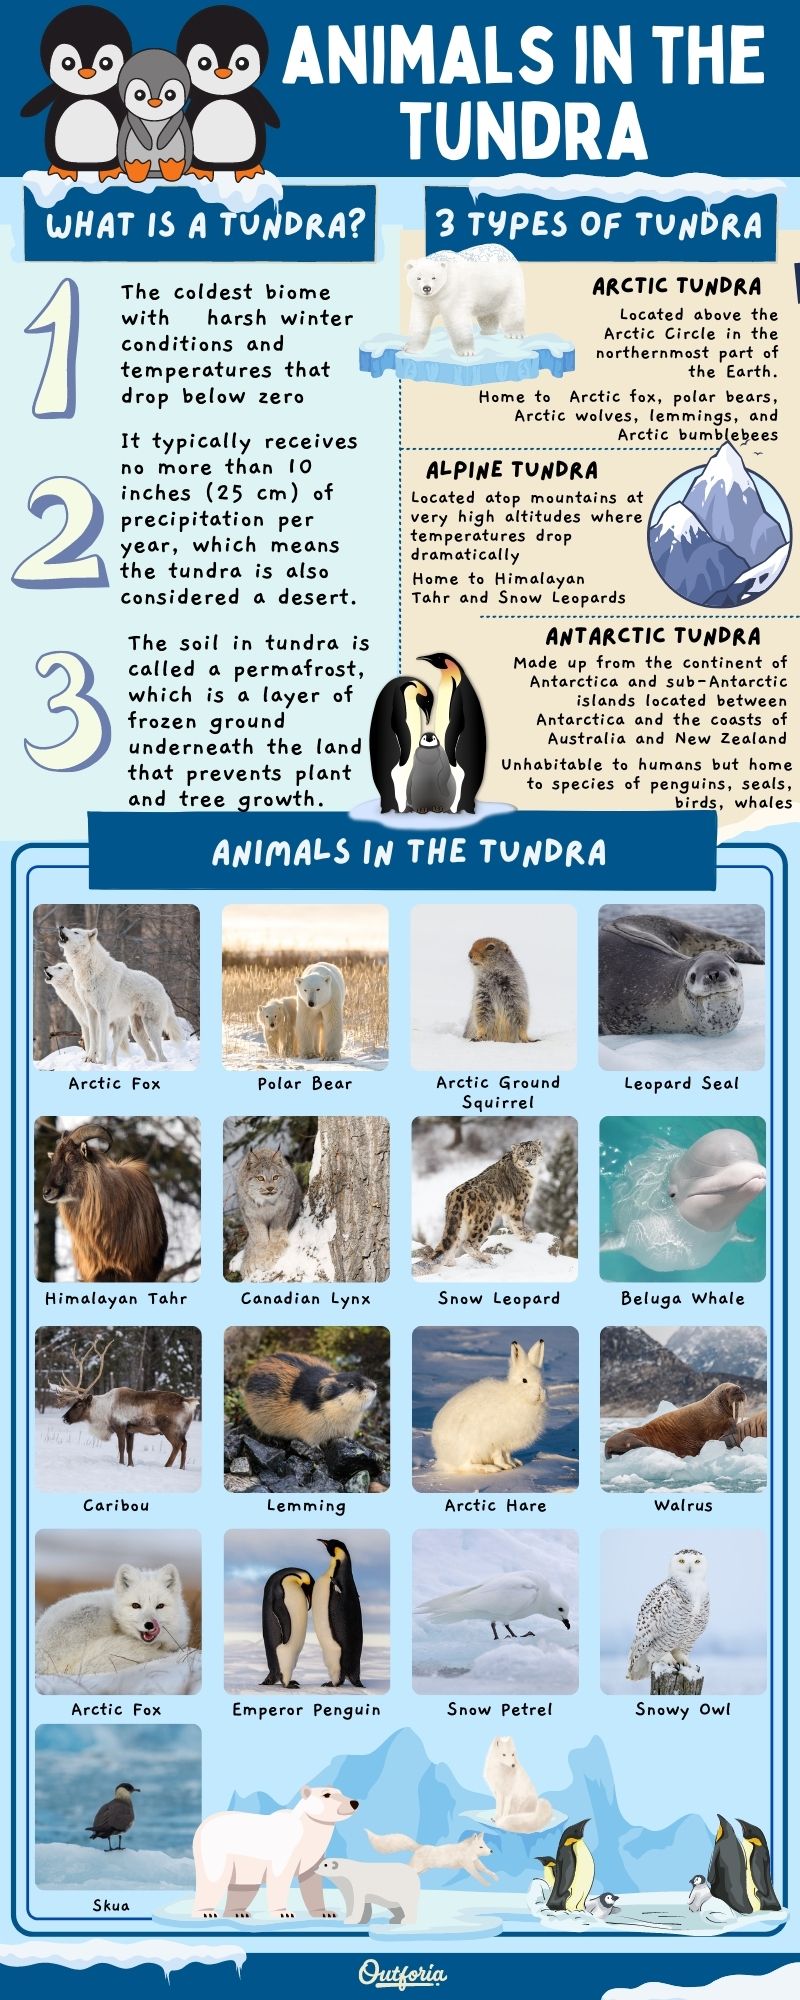 chart of the animals in the tundra with images and names plus tundra facts 